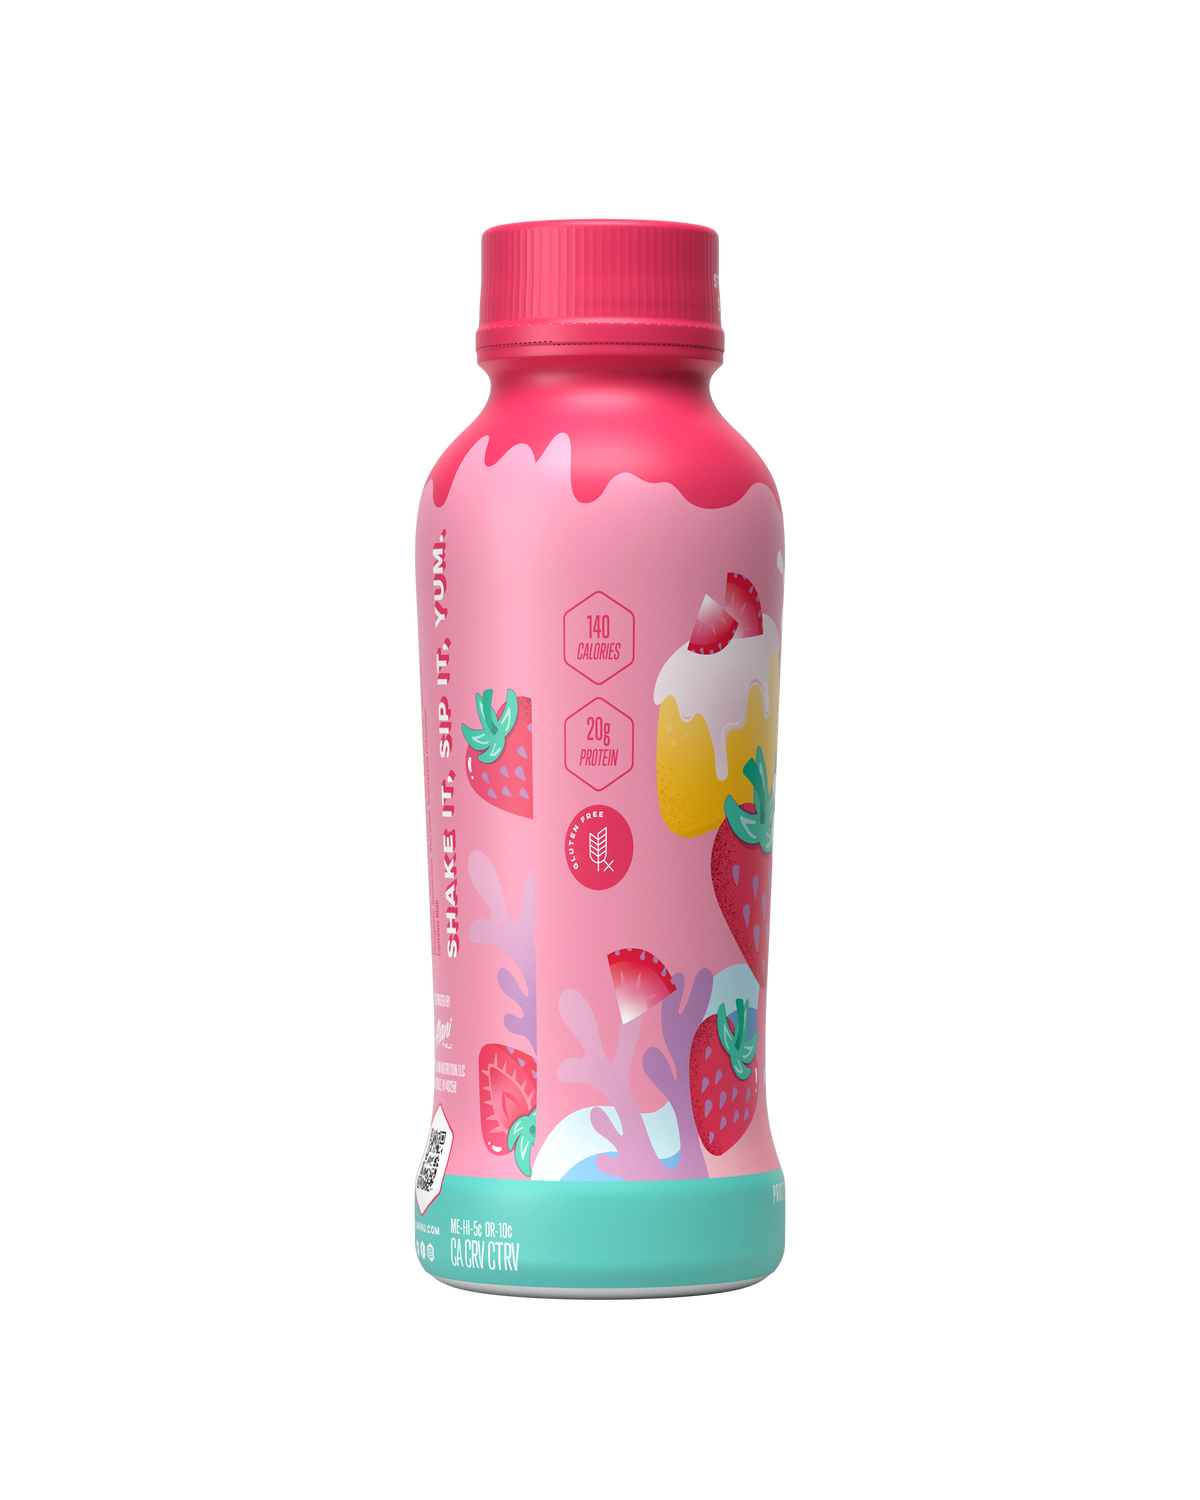 A side view of Protein Shake in Strawberry Shortcake flavor showcasing details of product.